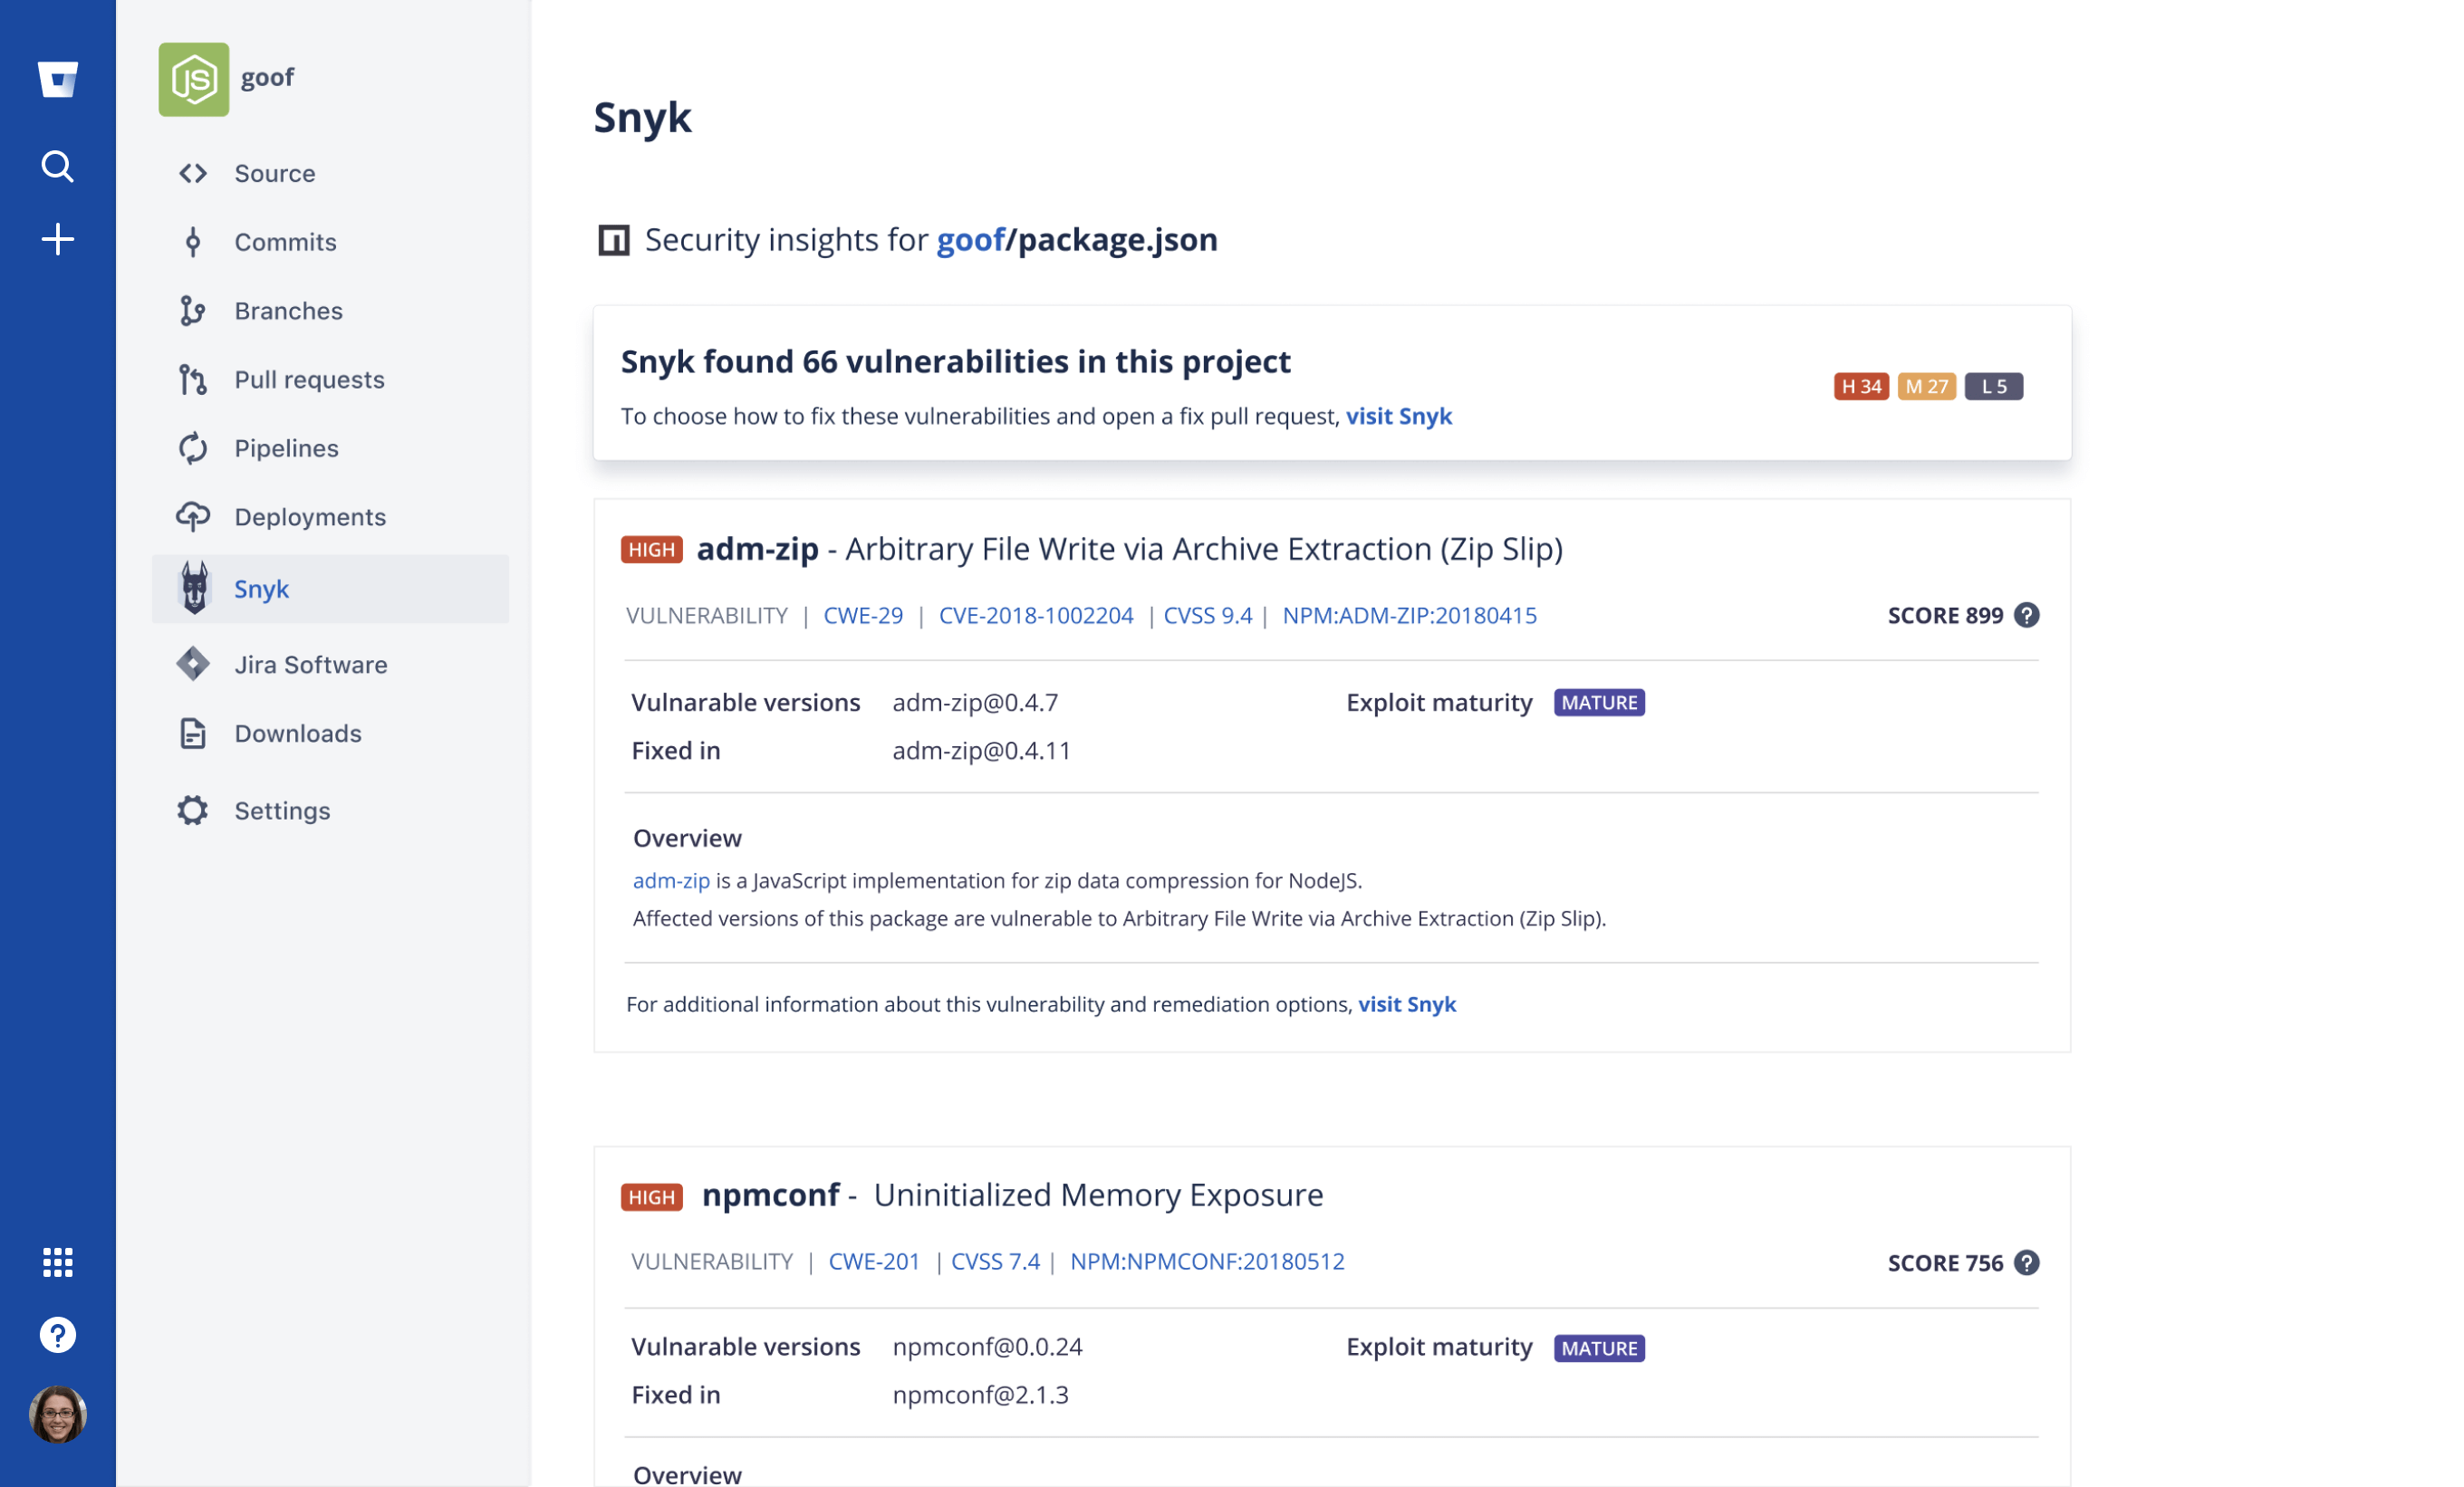 Finding and fixing vulnerabilities using Snyk embedded scanning in Bitbucket